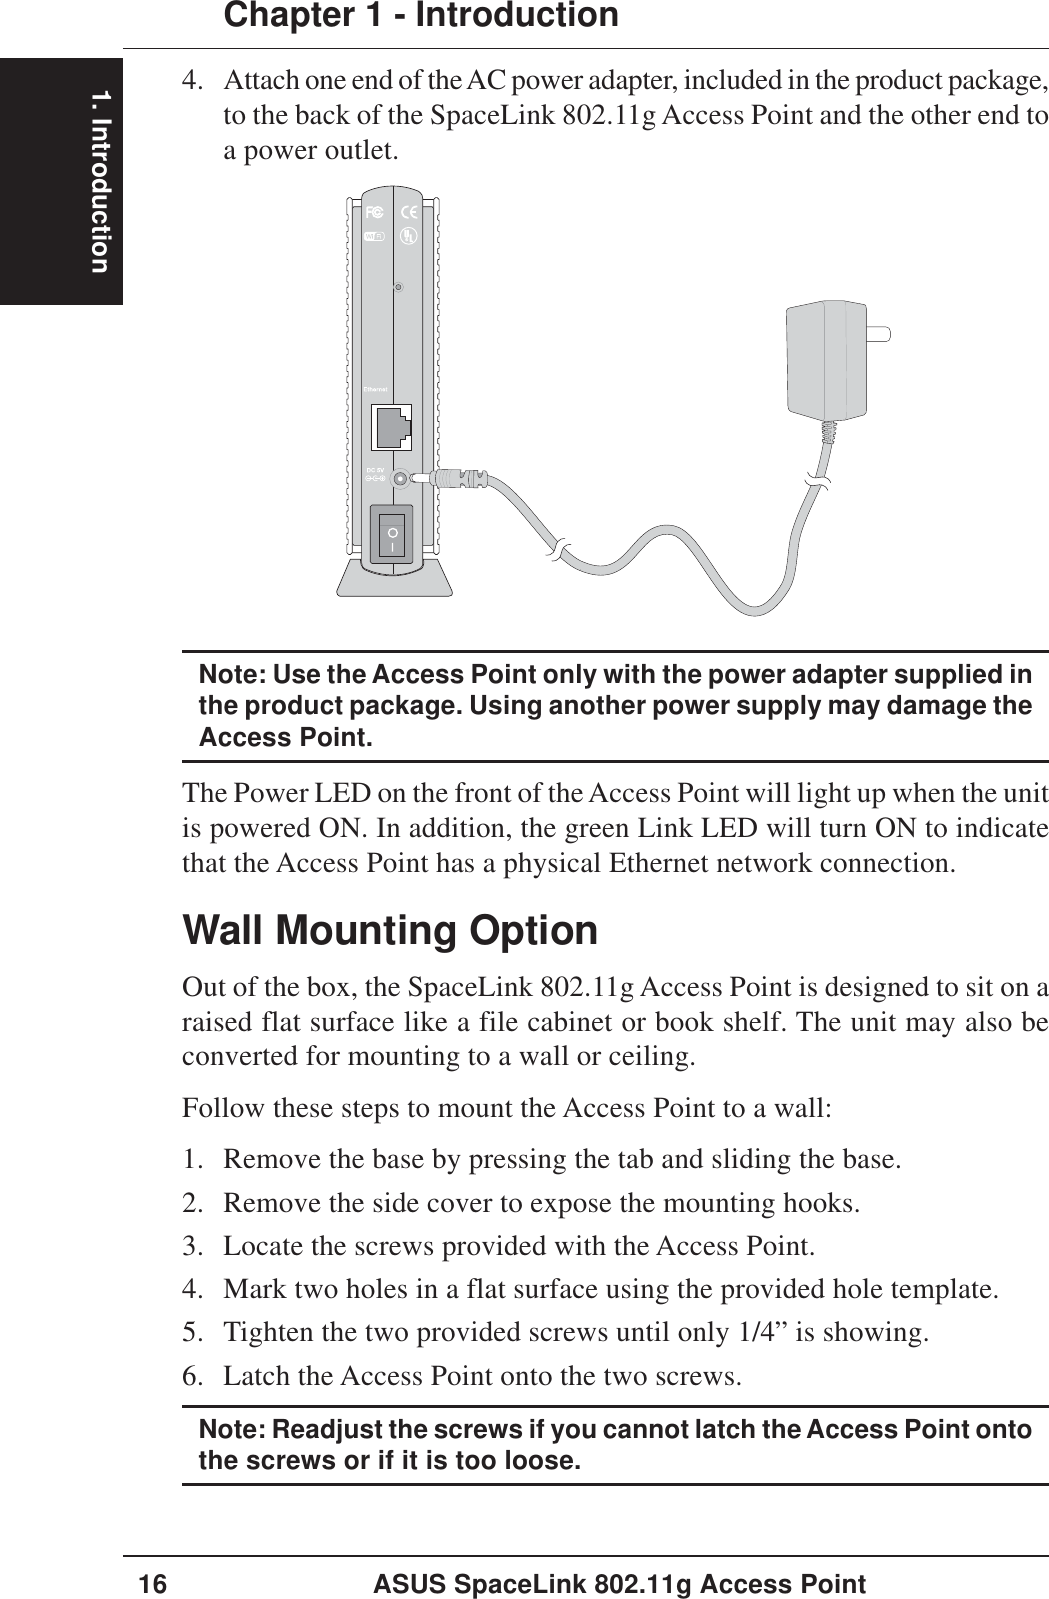 1. IntroductionChapter 1 - Introduction16 ASUS SpaceLink 802.11g Access Point4. Attach one end of the AC power adapter, included in the product package,to the back of the SpaceLink 802.11g Access Point and the other end toa power outlet.Wall Mounting OptionOut of the box, the SpaceLink 802.11g Access Point is designed to sit on araised flat surface like a file cabinet or book shelf. The unit may also beconverted for mounting to a wall or ceiling.Follow these steps to mount the Access Point to a wall:1. Remove the base by pressing the tab and sliding the base.2. Remove the side cover to expose the mounting hooks.3. Locate the screws provided with the Access Point.4. Mark two holes in a flat surface using the provided hole template.5. Tighten the two provided screws until only 1/4” is showing.6. Latch the Access Point onto the two screws.Note: Readjust the screws if you cannot latch the Access Point ontothe screws or if it is too loose.Note: Use the Access Point only with the power adapter supplied inthe product package. Using another power supply may damage theAccess Point.The Power LED on the front of the Access Point will light up when the unitis powered ON. In addition, the green Link LED will turn ON to indicatethat the Access Point has a physical Ethernet network connection.